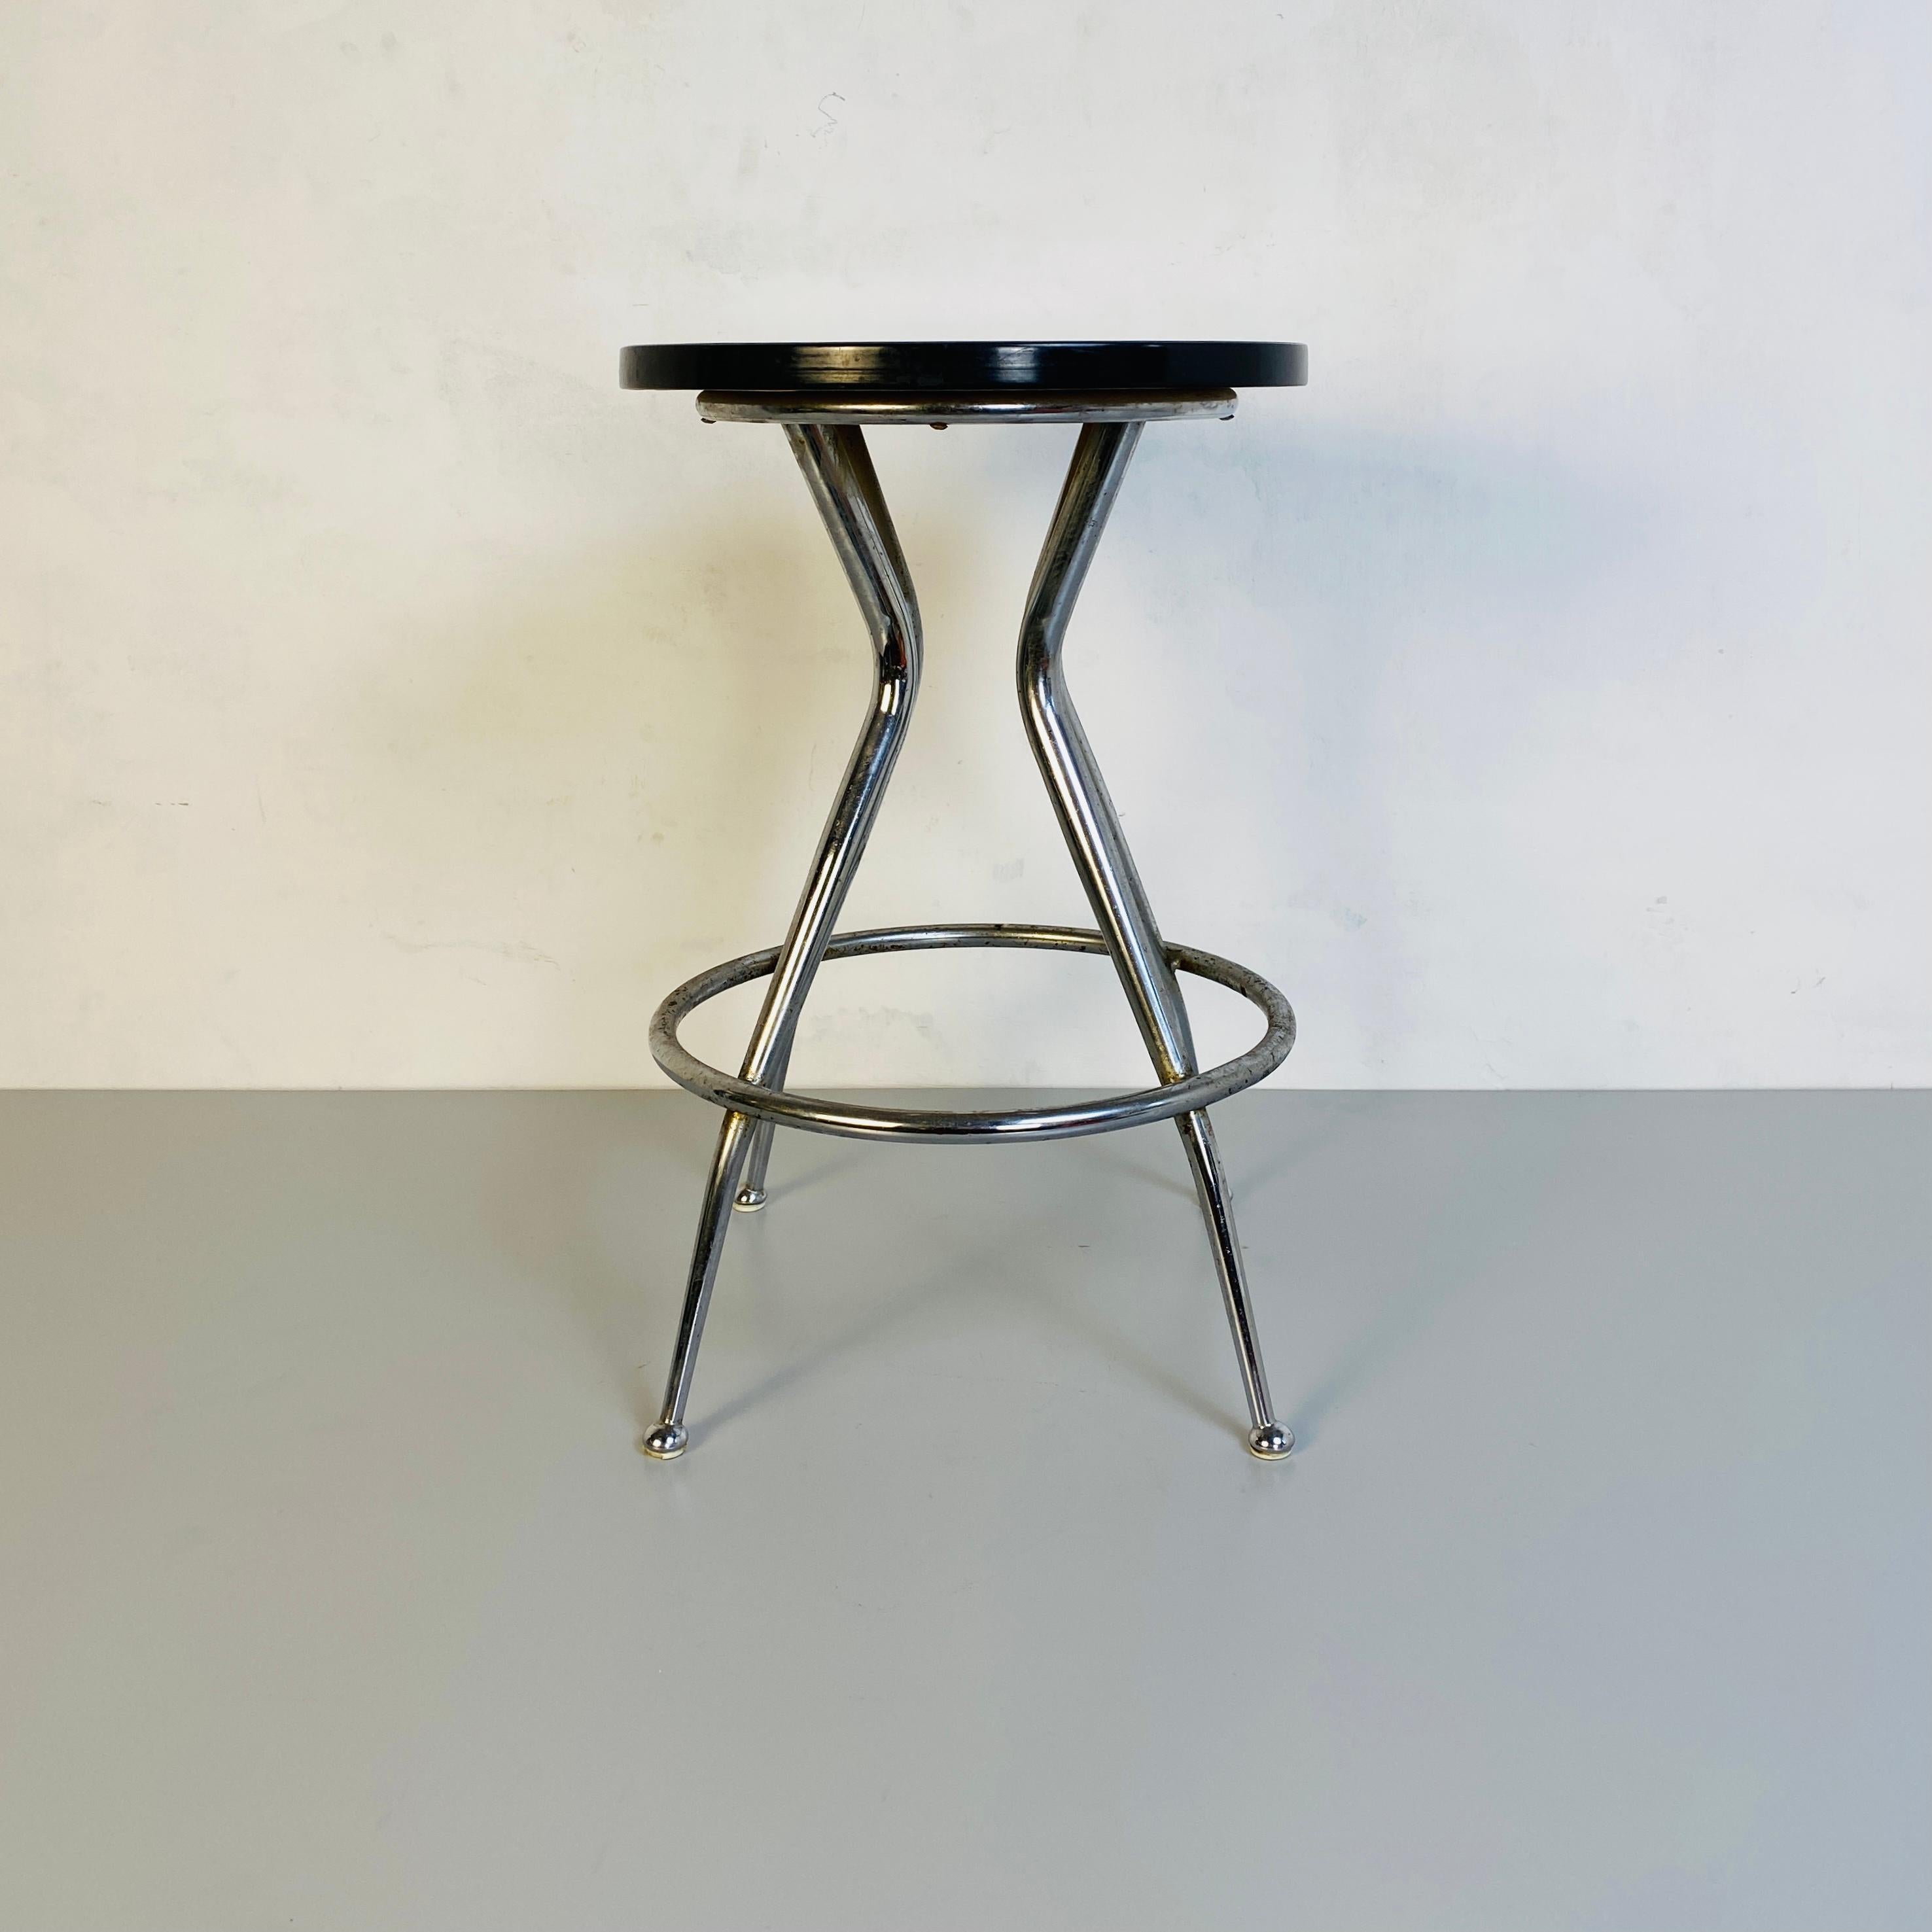 Italian mid-century modern black and chromed stool, 1950s
Black Stool with curved legs in chromed steel and round seat in wood covered in black formica, 1950s.

Good conditions.
Perfect for a kitchen or a breakfast table, this stool can be used near